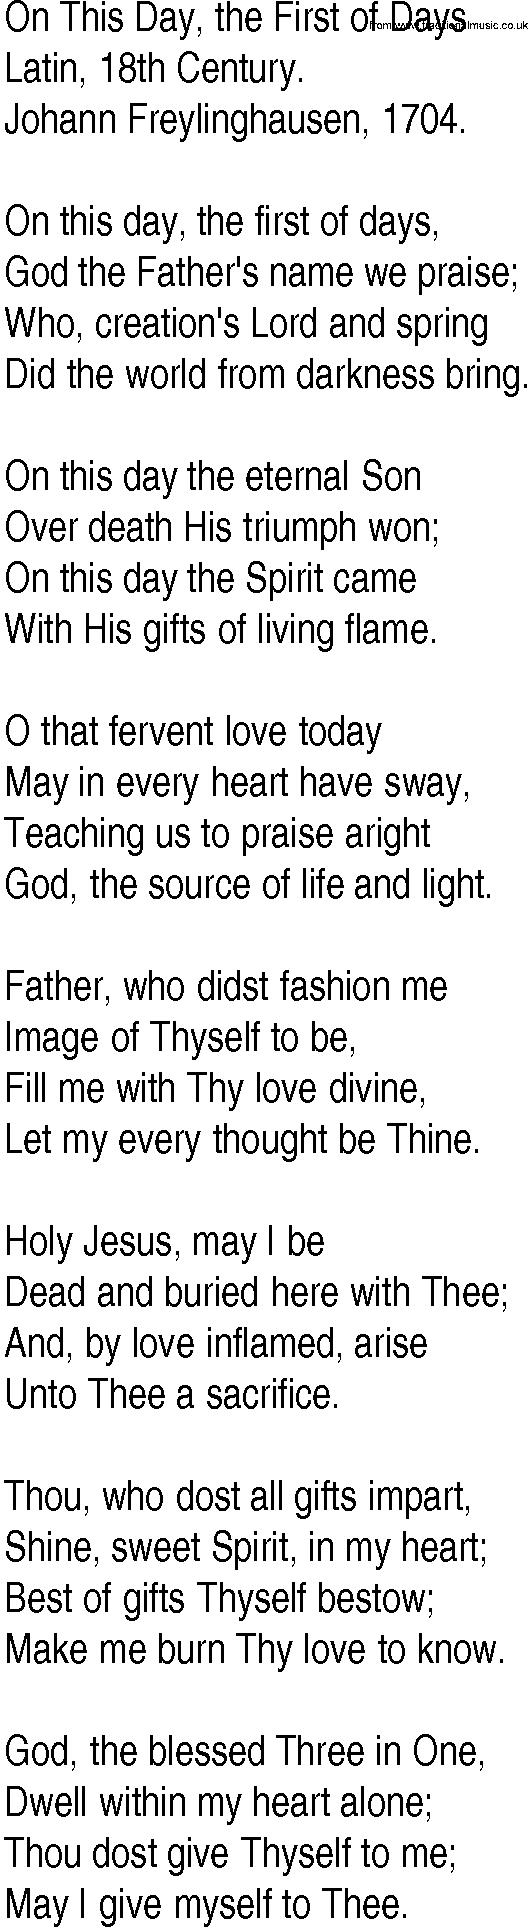 Hymn and Gospel Song: On This Day, the First of Days by Latin th Century lyrics